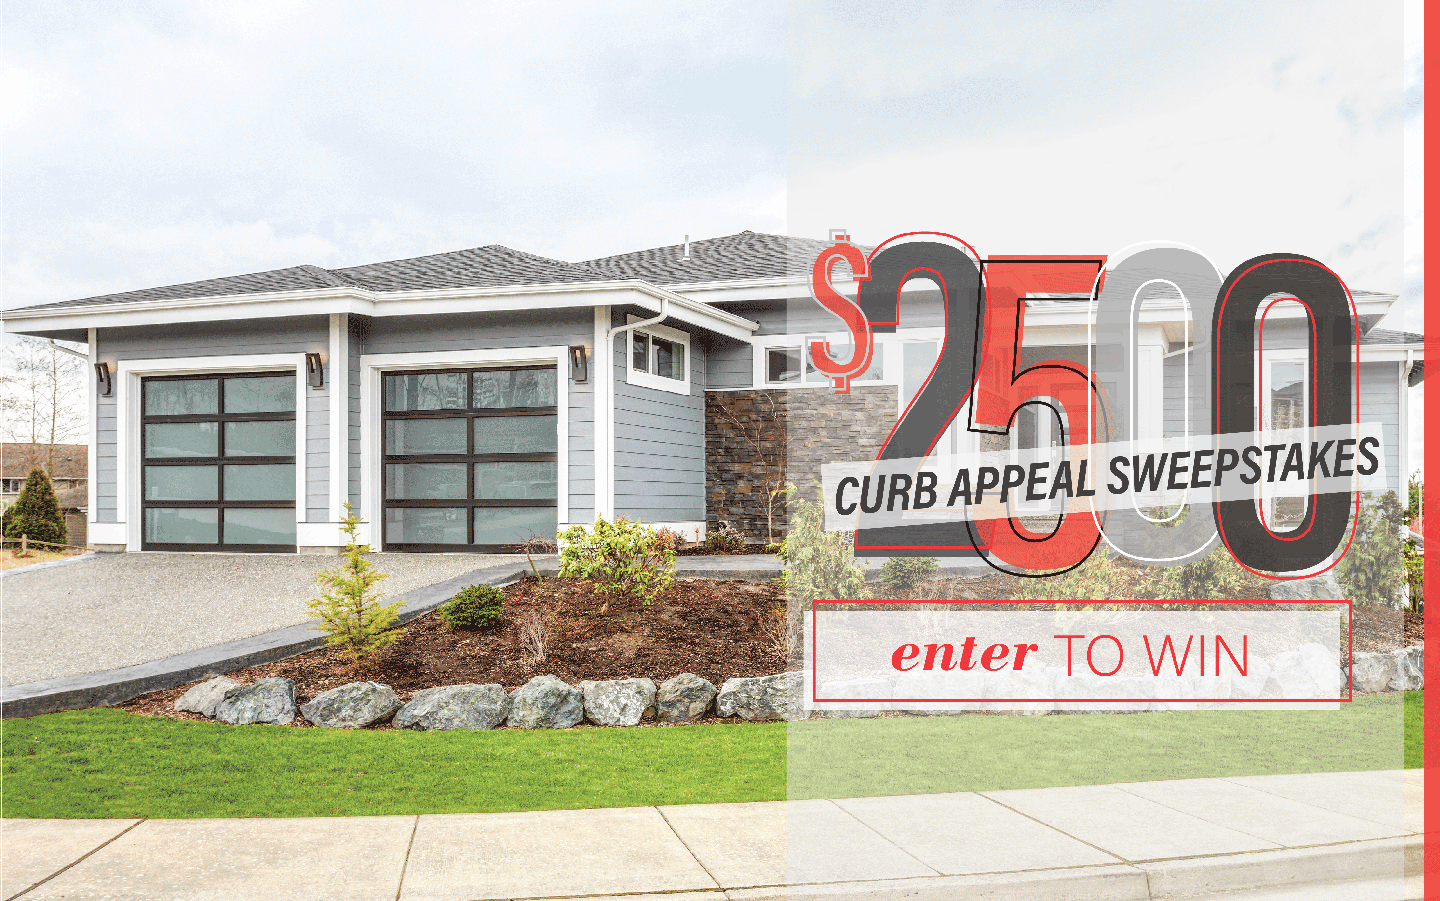 $2500 Curb Appeal Sweepstakes